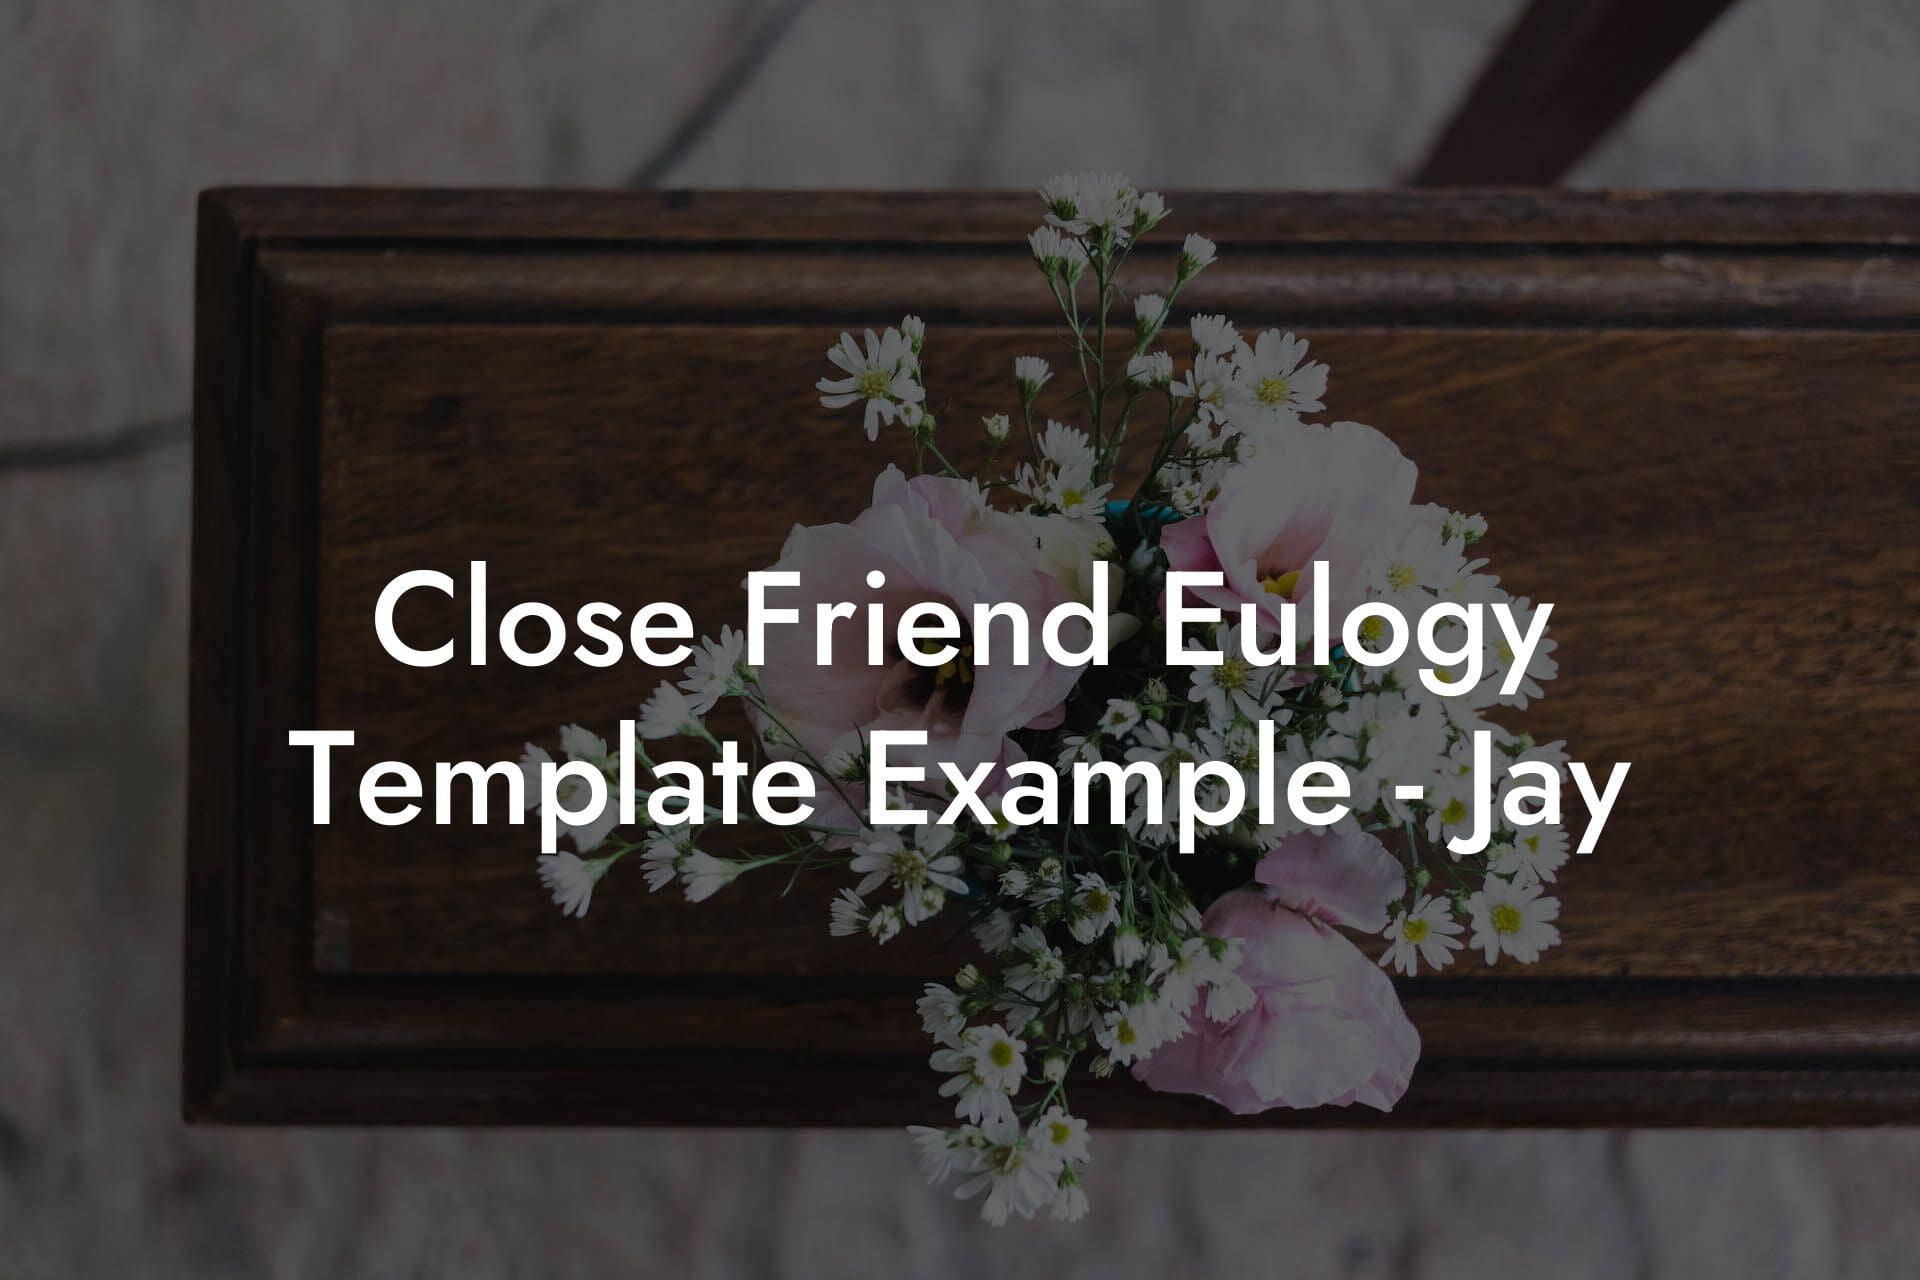 Close Friend Eulogy Template Example   Jay